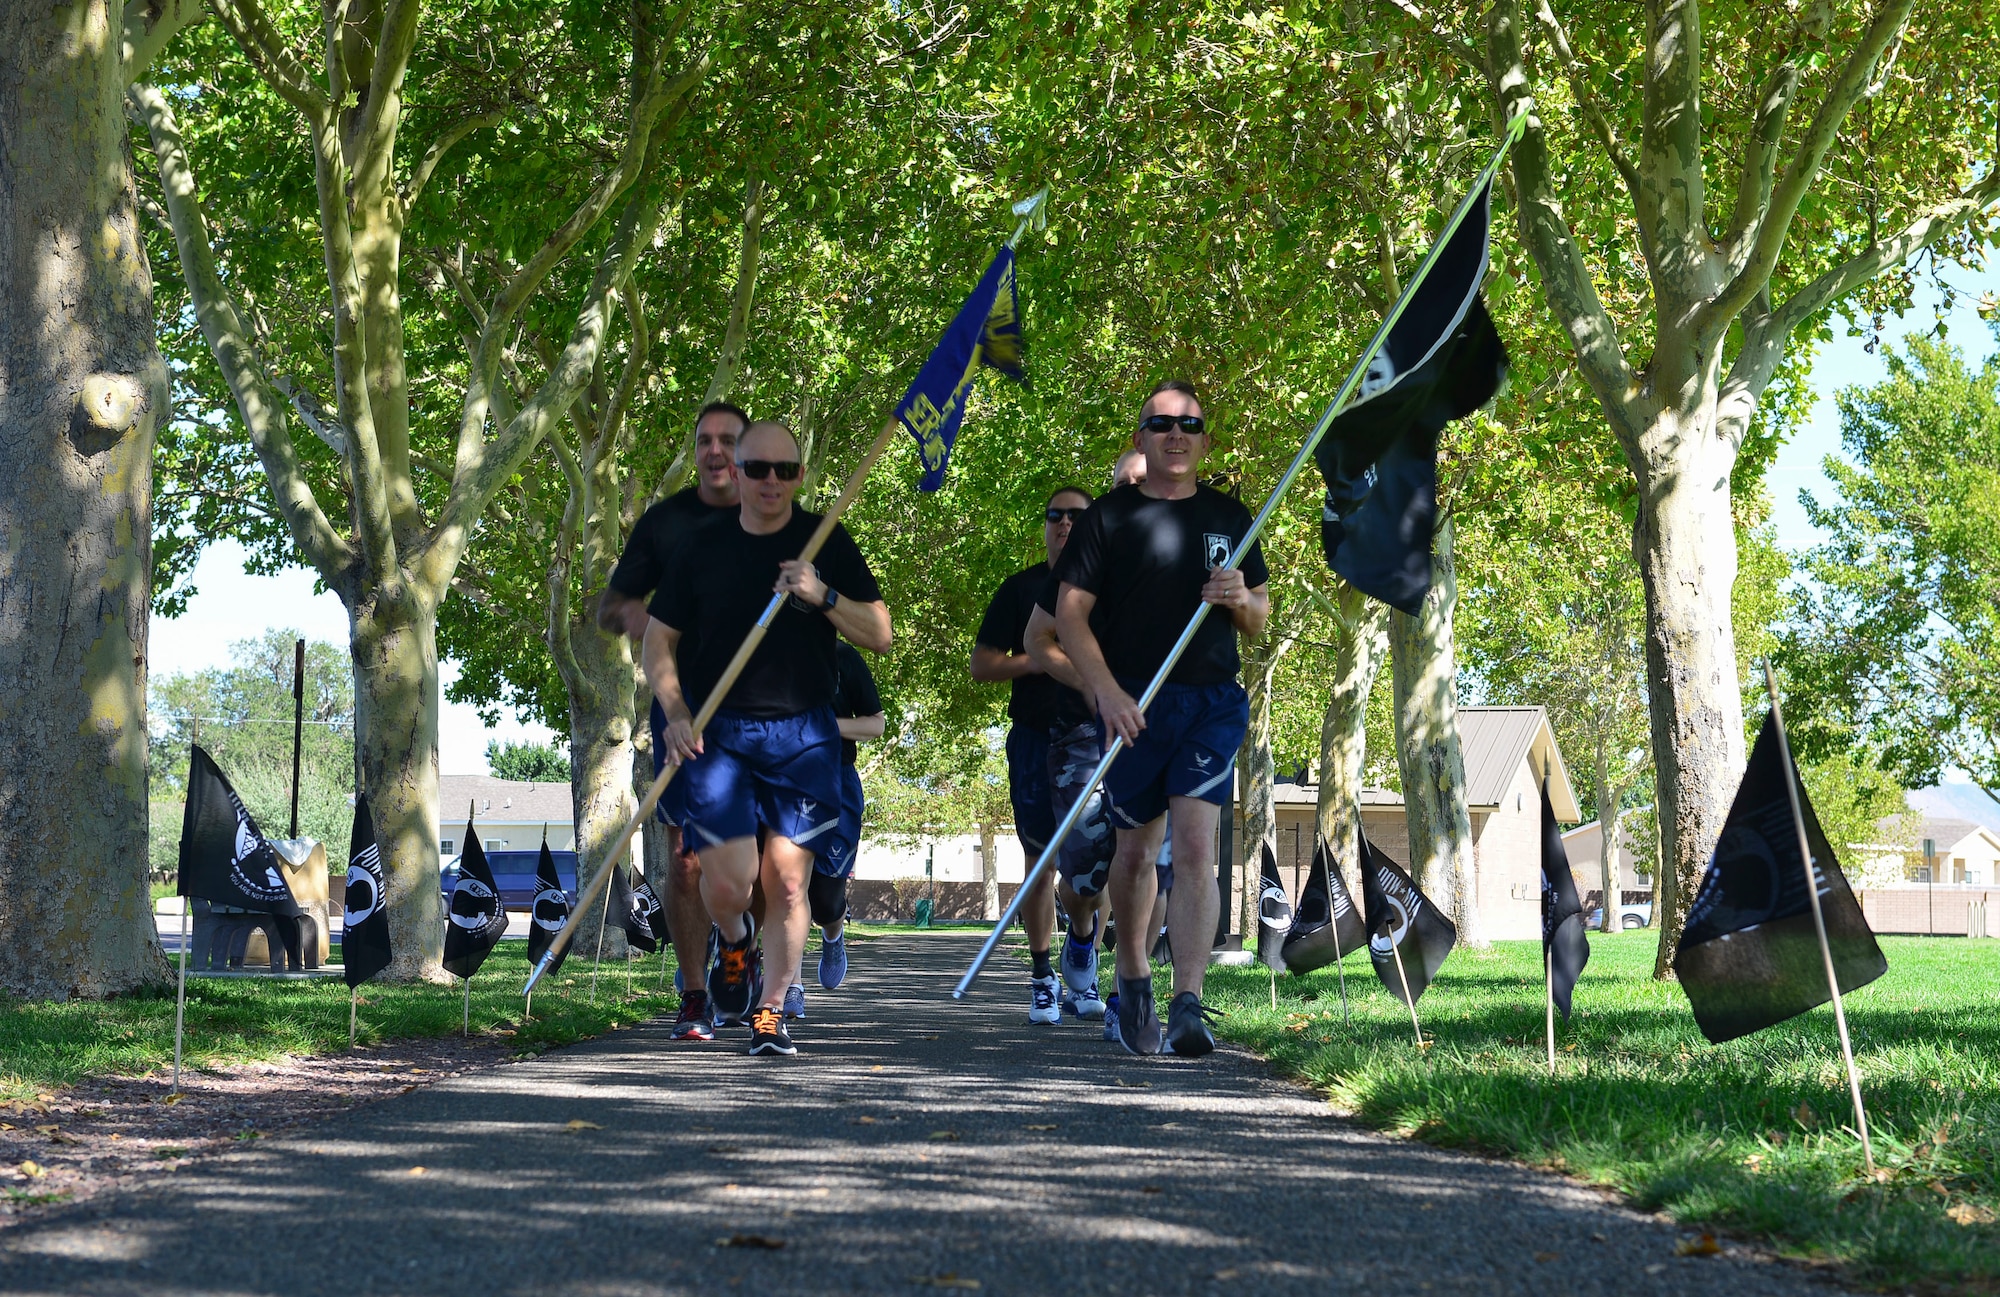 Team Kirtland First Sergeants begin the 24-hour run or walk at Kirtland Air Force Base, N.M., Sept. 19, 2019. More than 150 members of Team Kirtland participated in the annual POW/MIA event. (U.S. Air Force photo by Senior Airman Enrique Barceló)